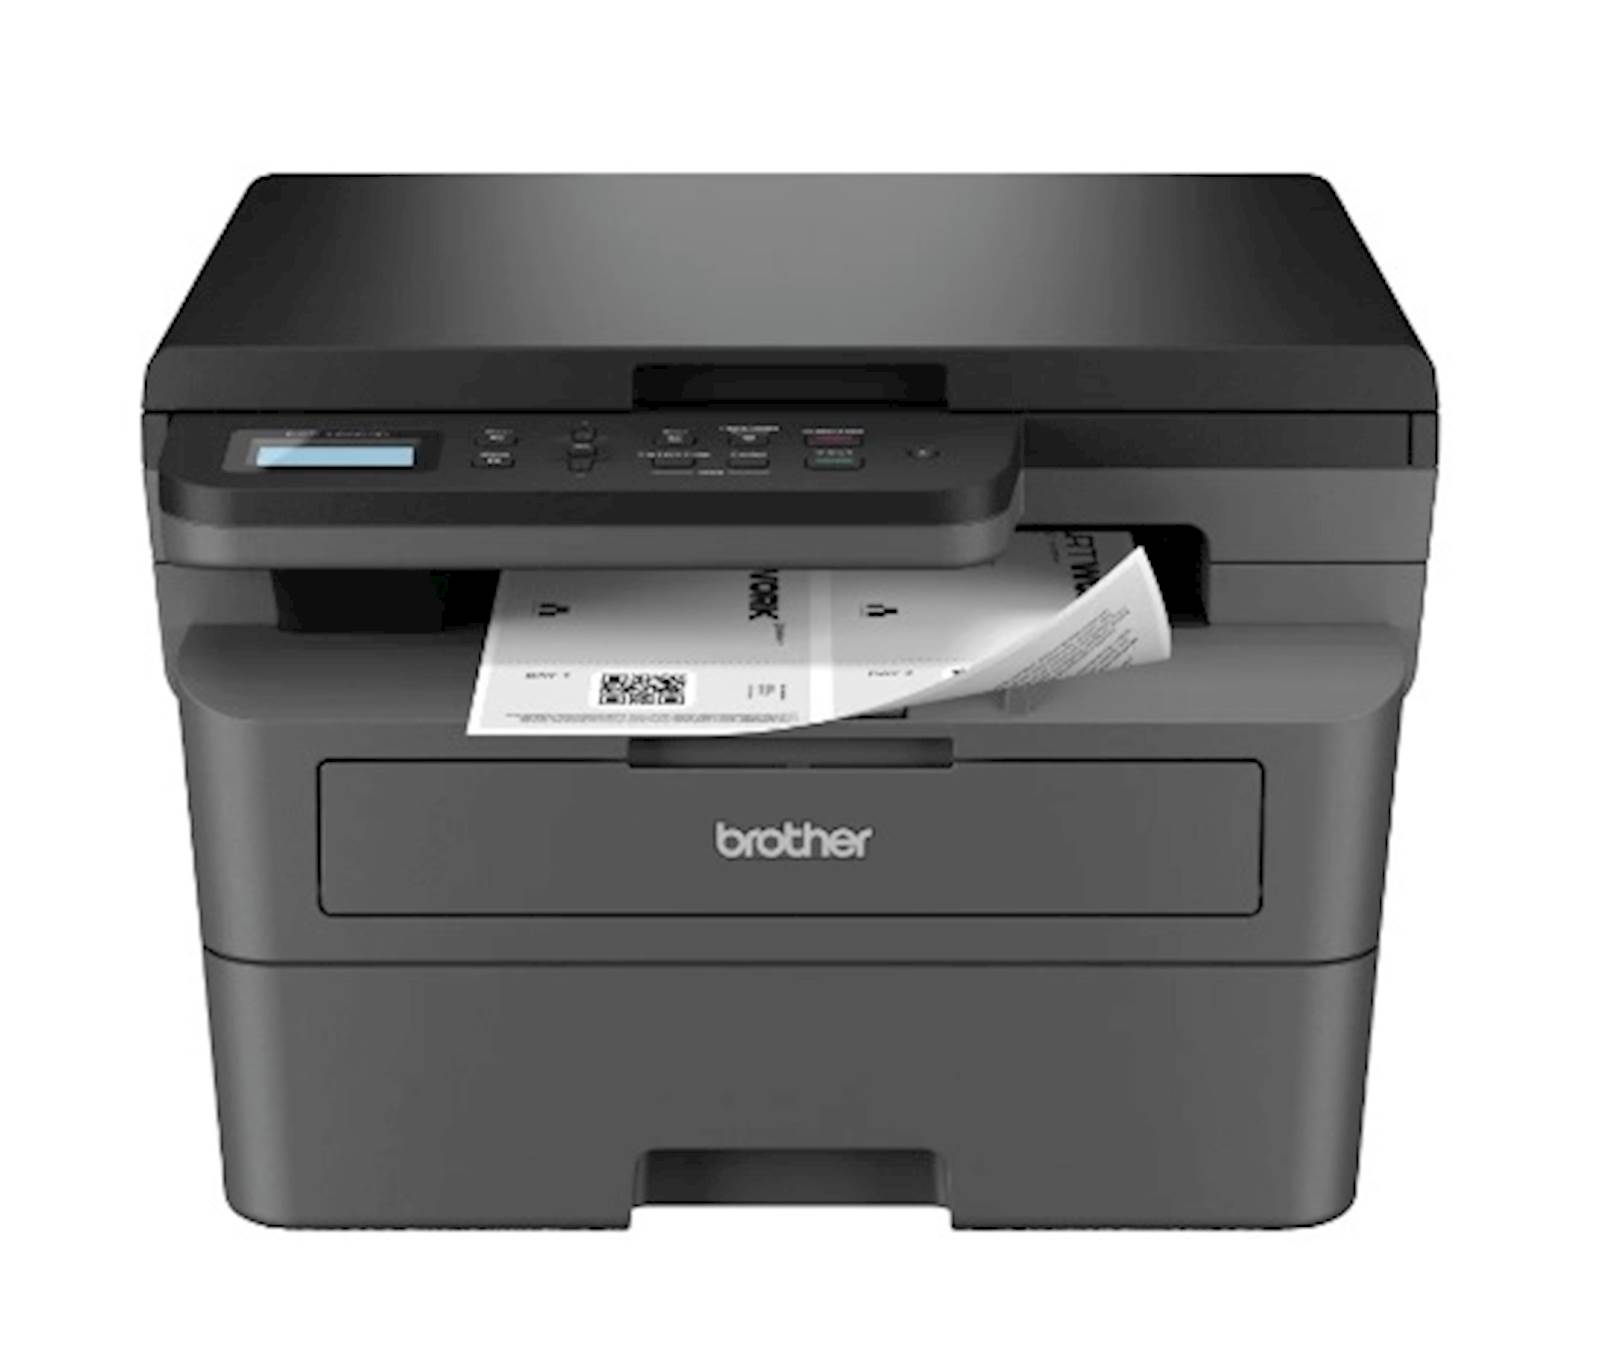 MFP BROTHER DCP-L2600D